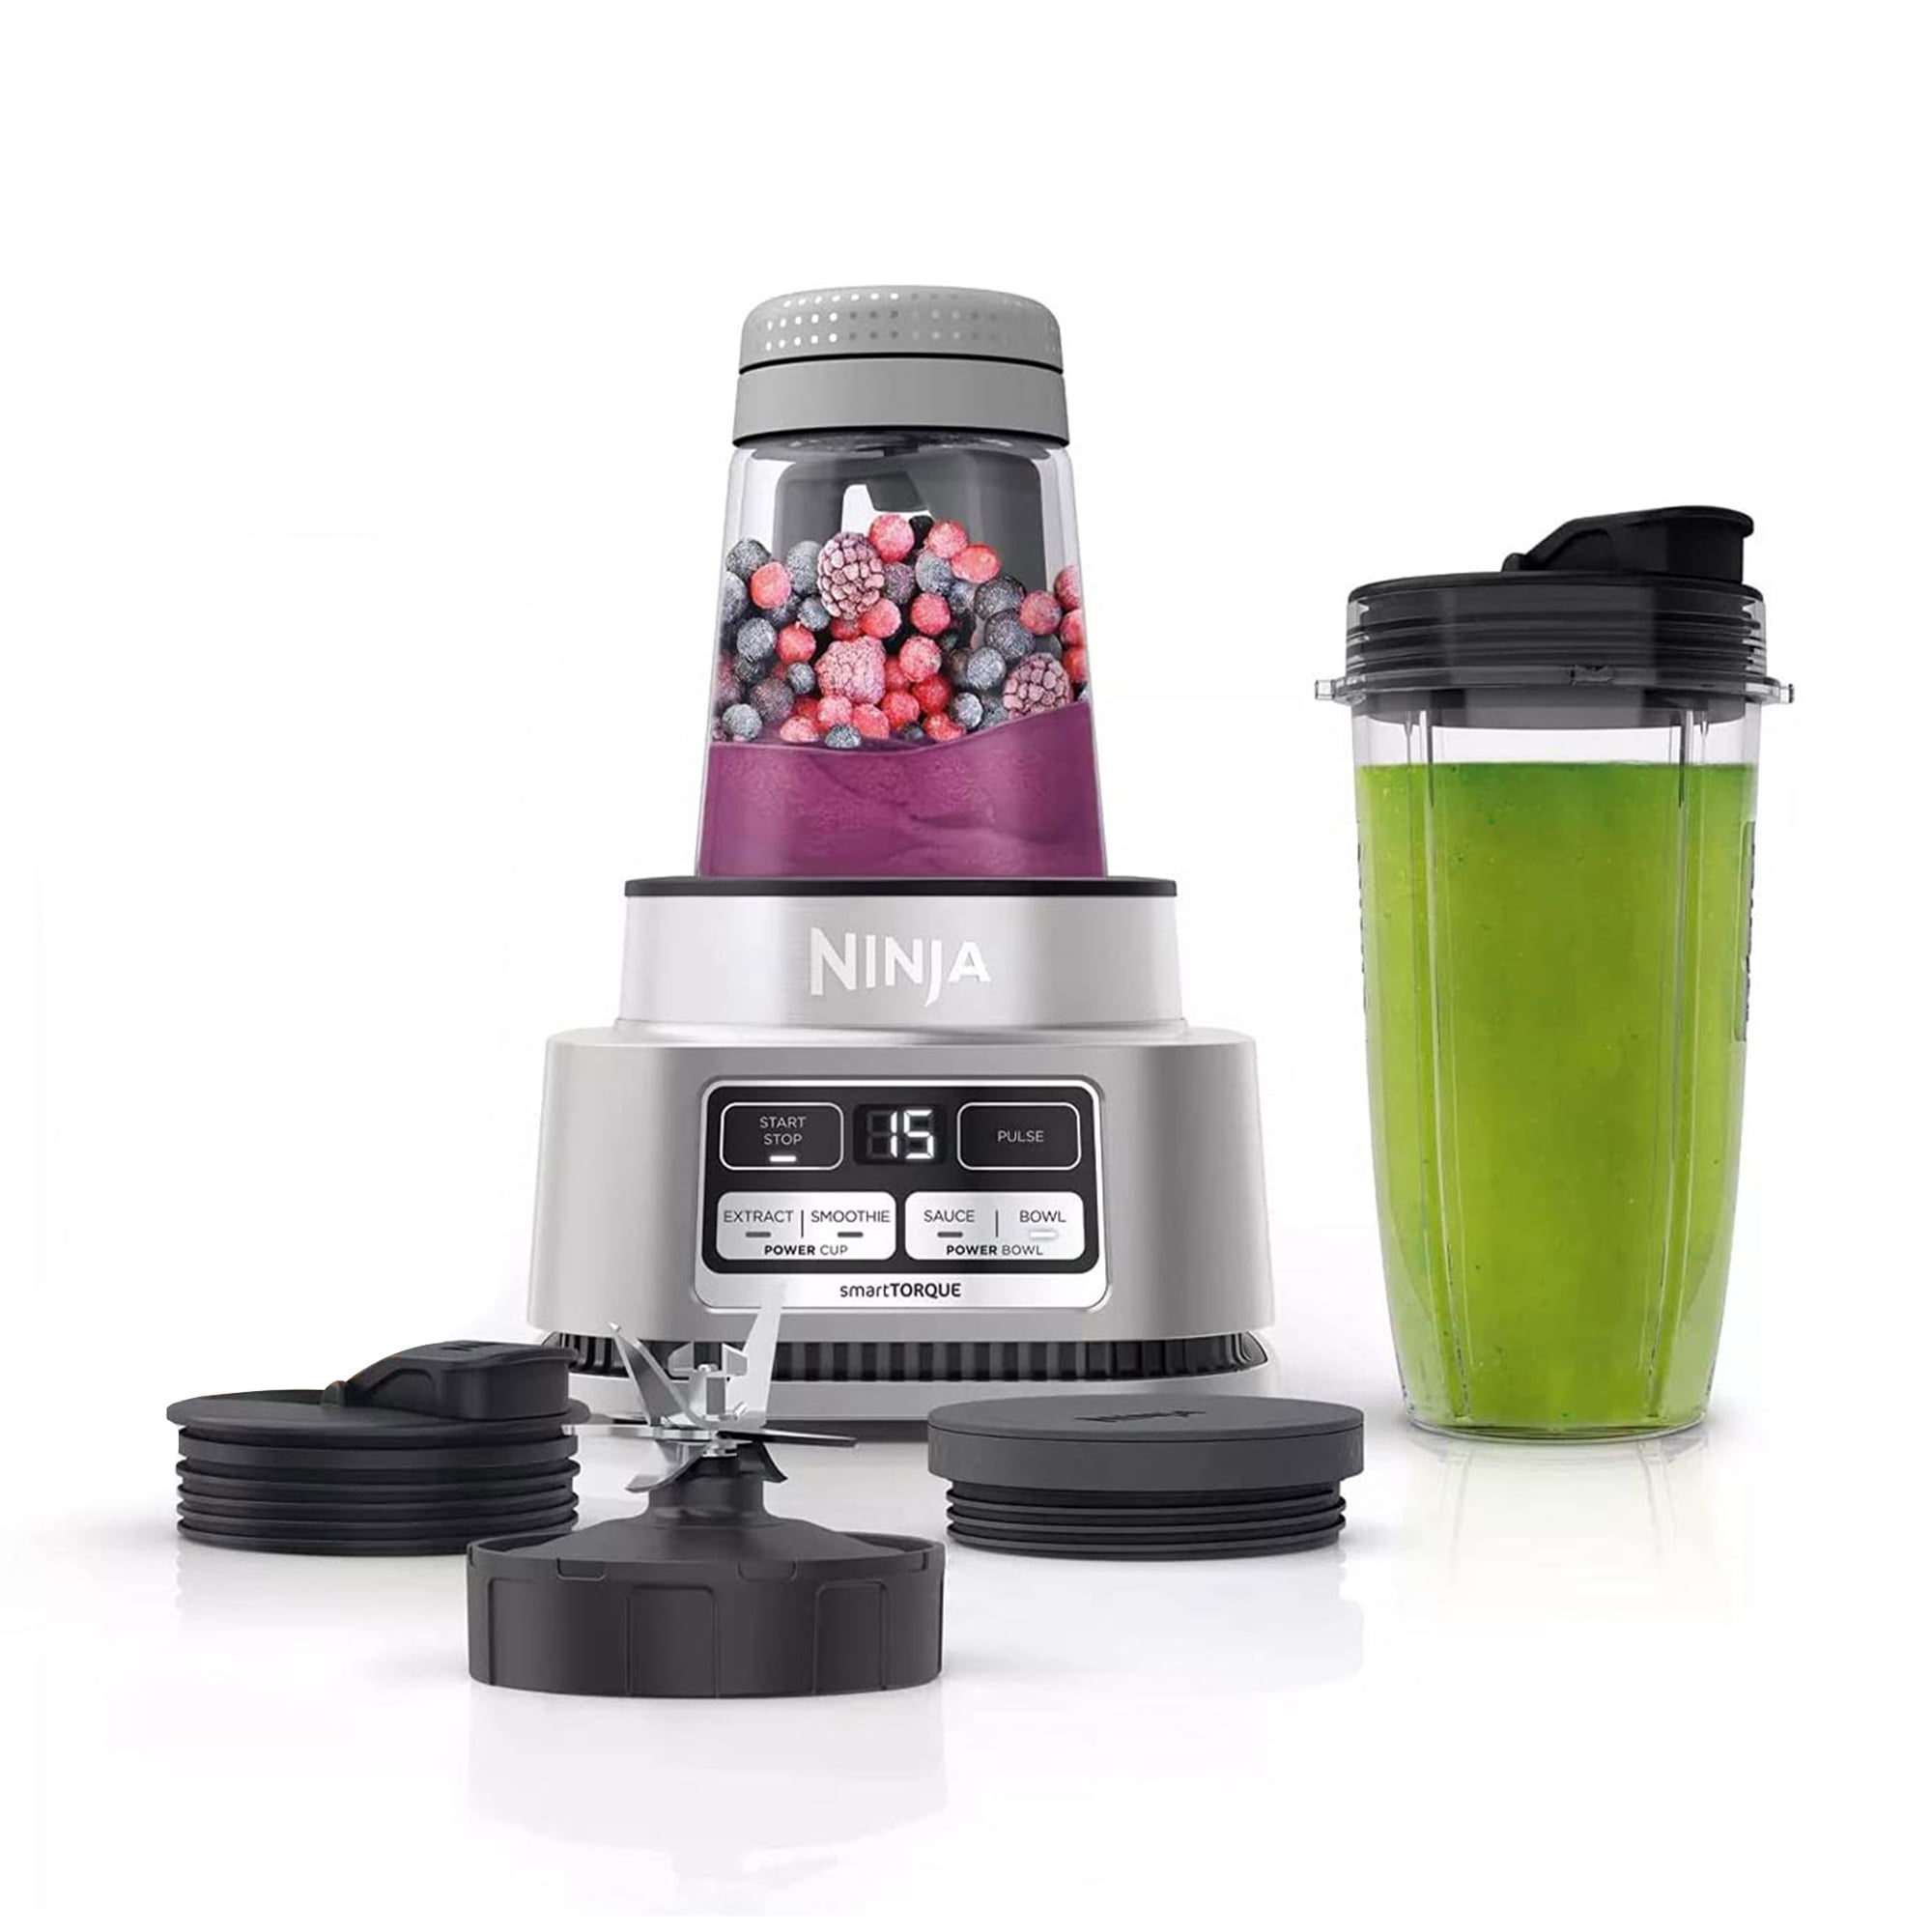 Ninja Foodi Smoothie Bowl Maker and Nutrient Extractor* Blender 1100W Auto-iQ, with 24-oz. Nutrient Extraction* Cup, SS100